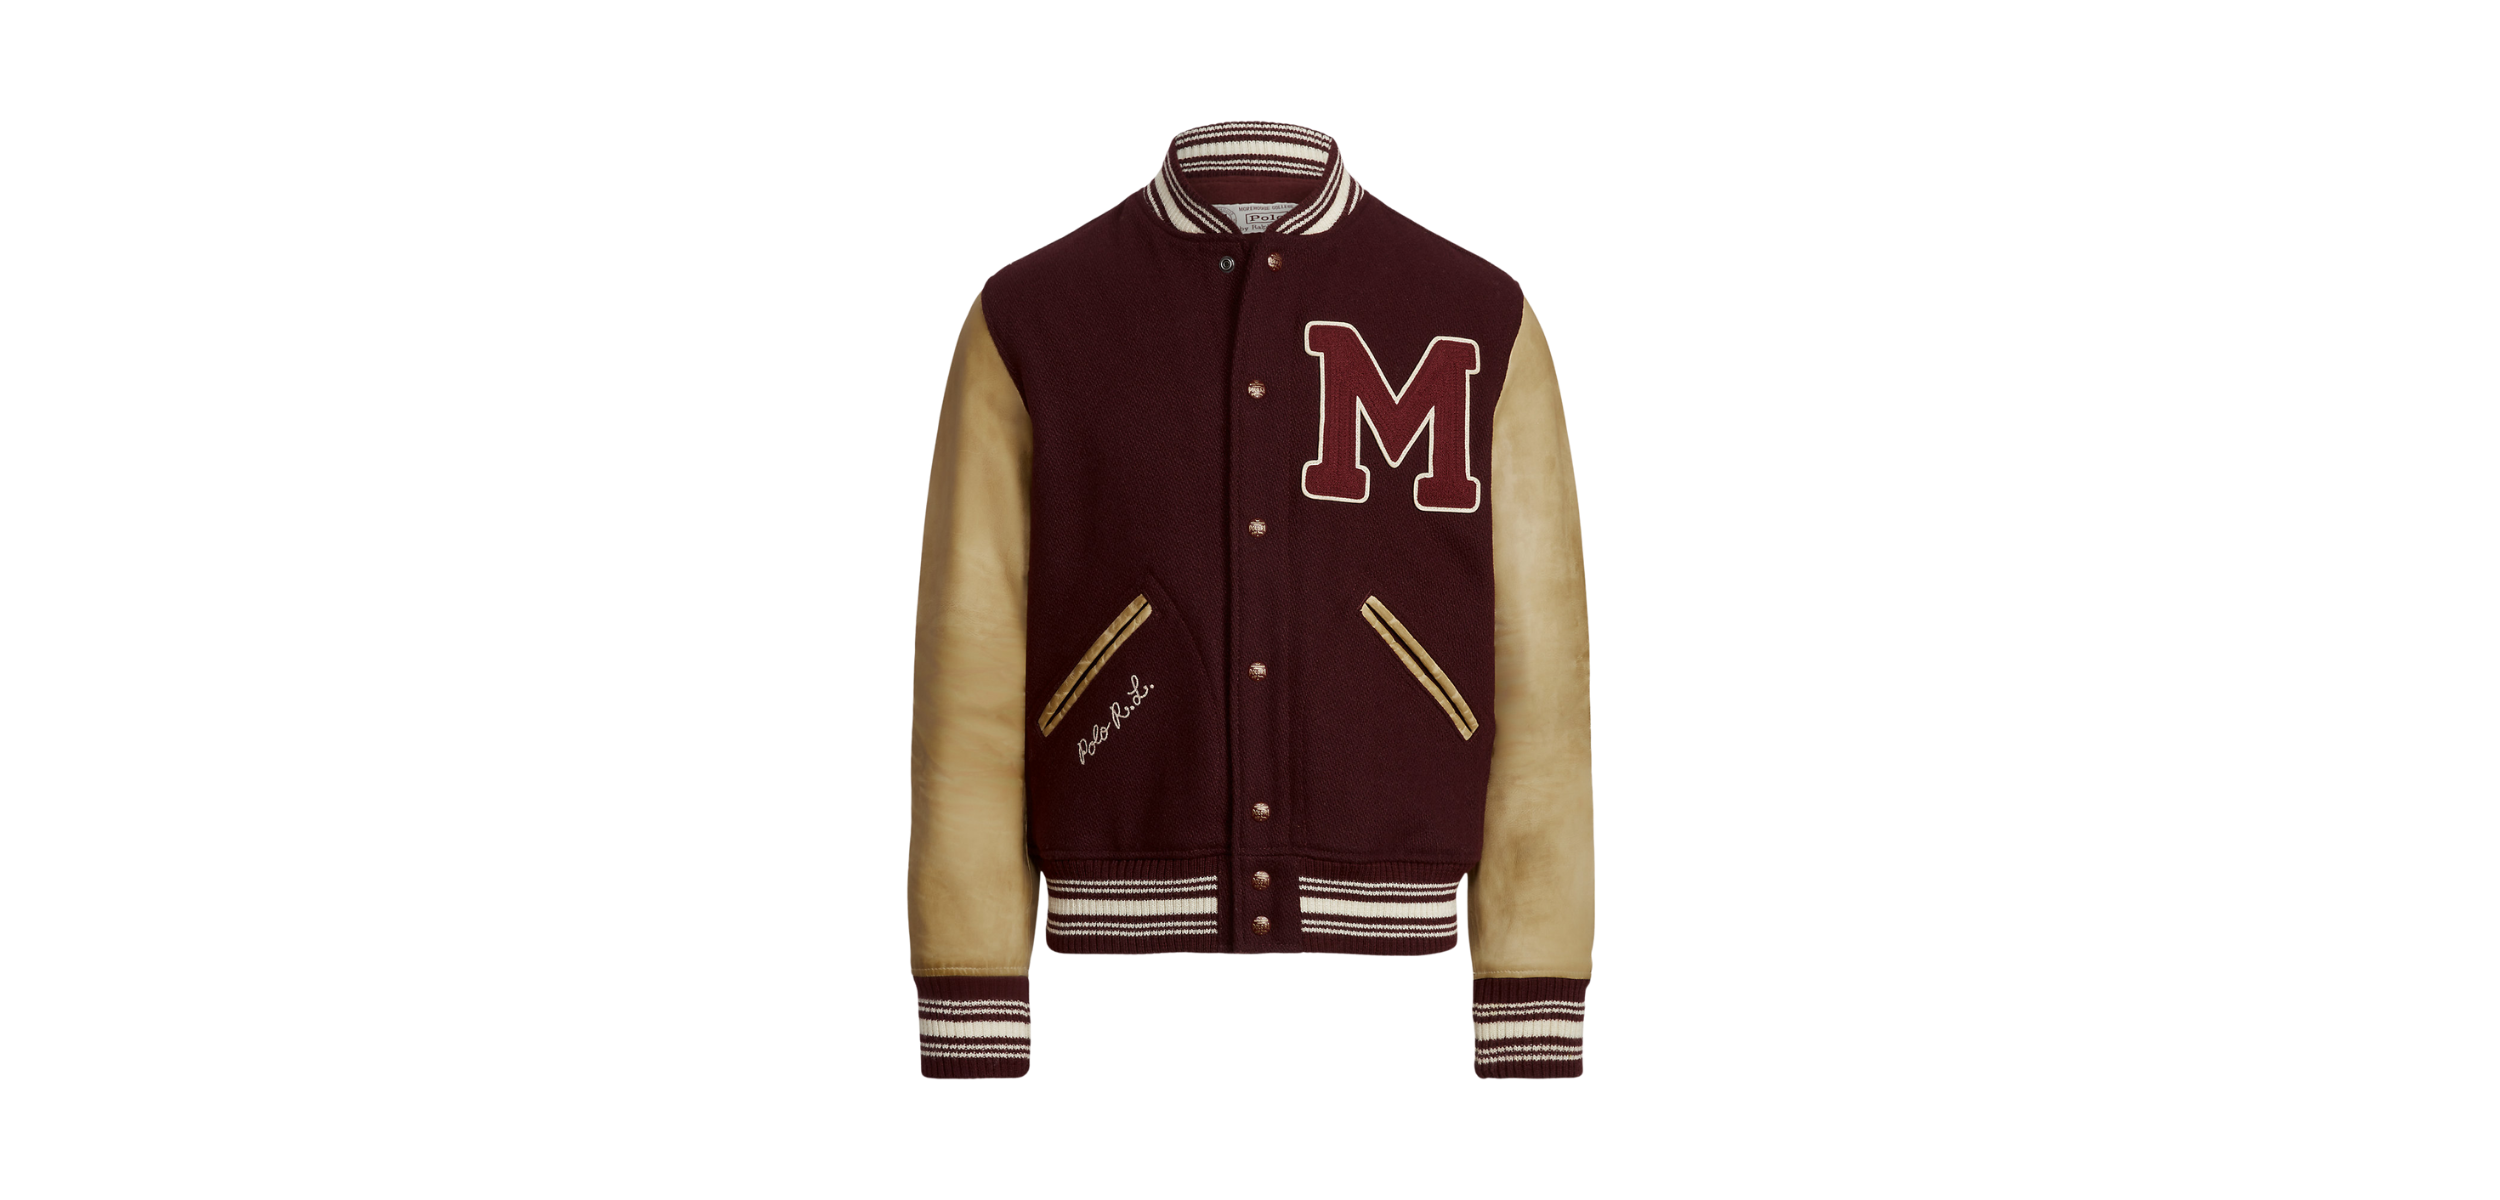 Ralph Lauren Morehouse Tigers Jacket - Flawless Crowns